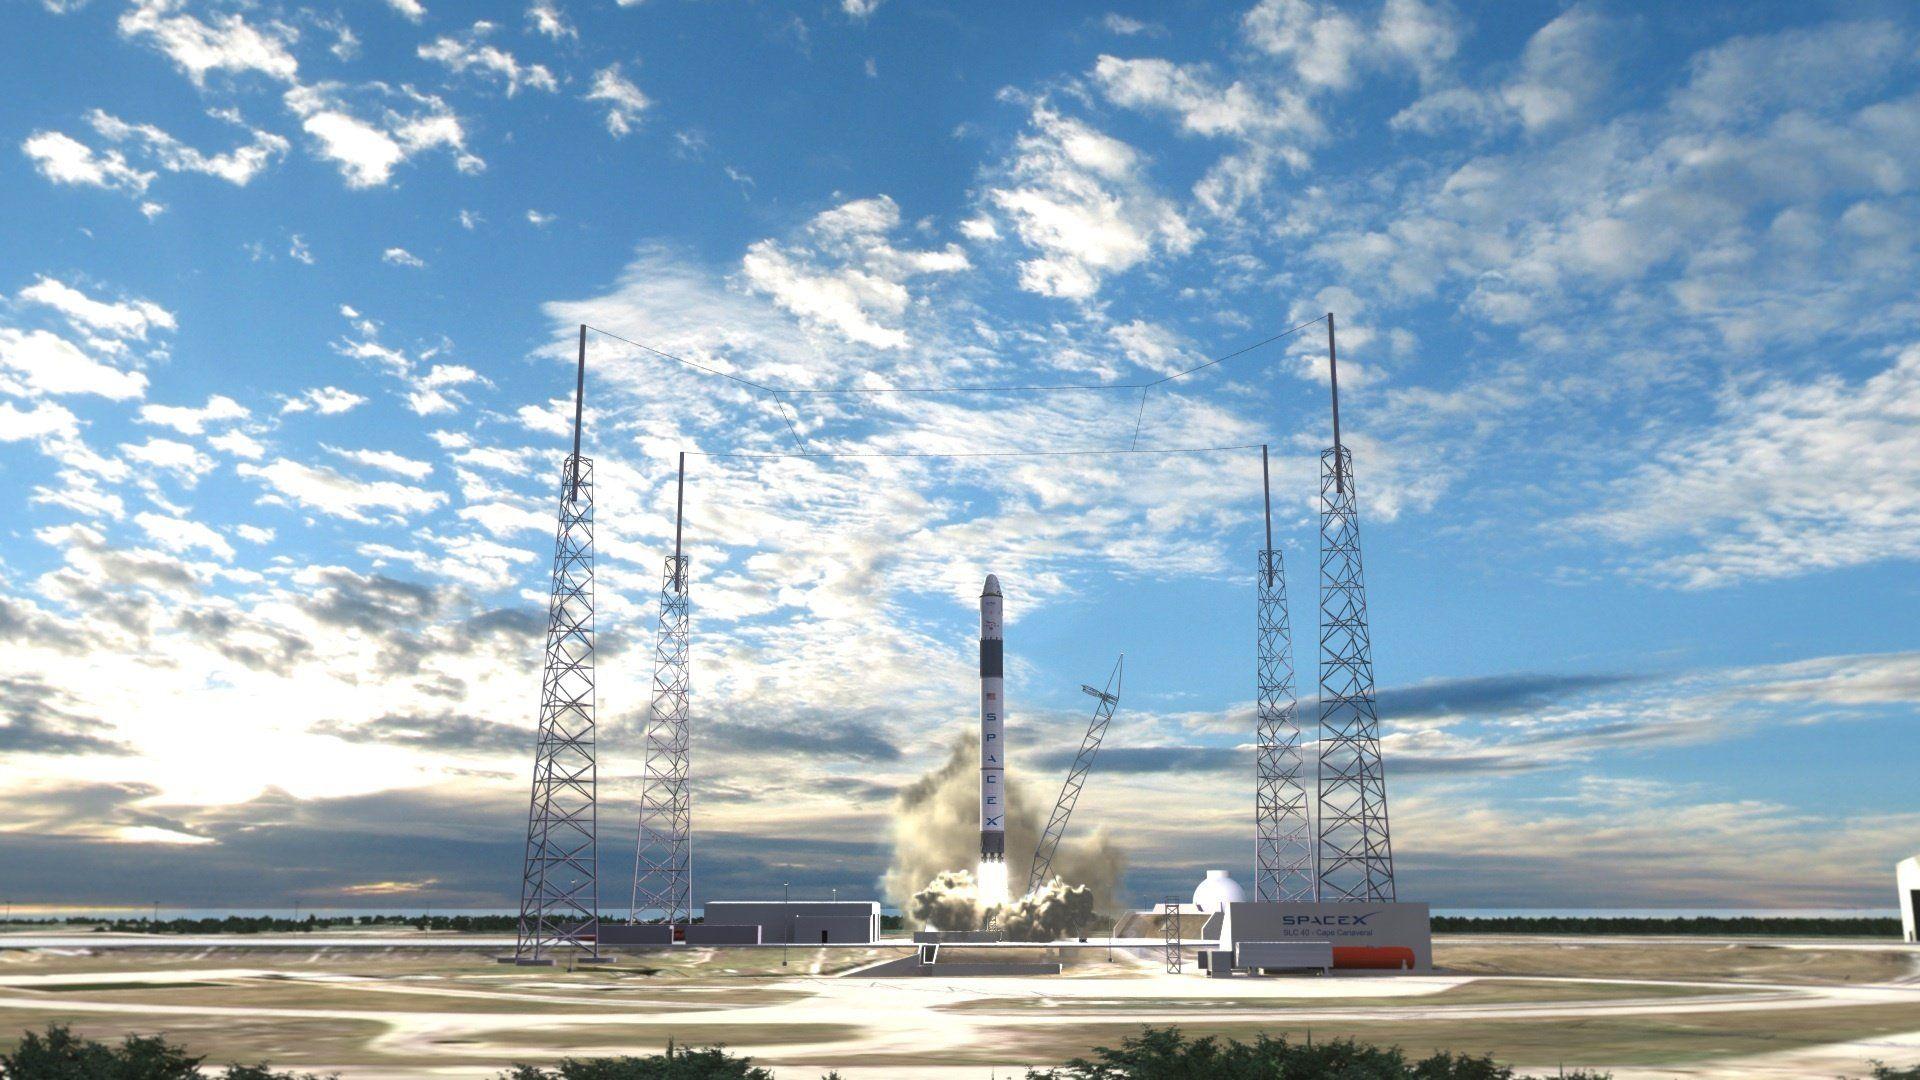 SpaceX Launch Widescreen Wallpaper 59807 2880x1800px